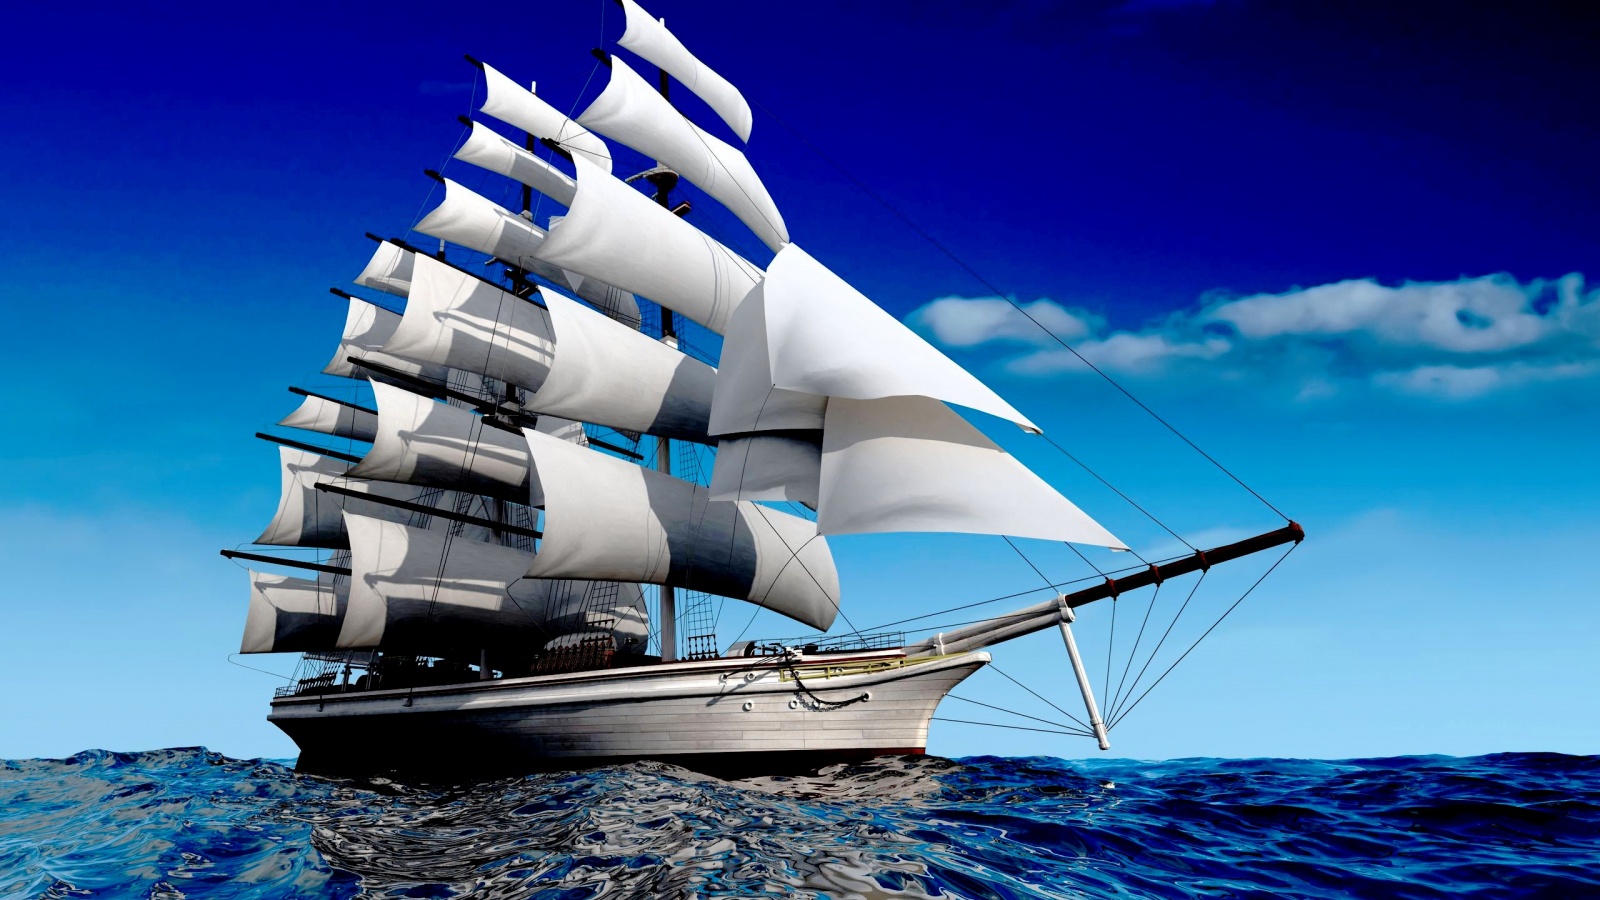 awesome sailboat new images desktop background sail boat cool hd ...